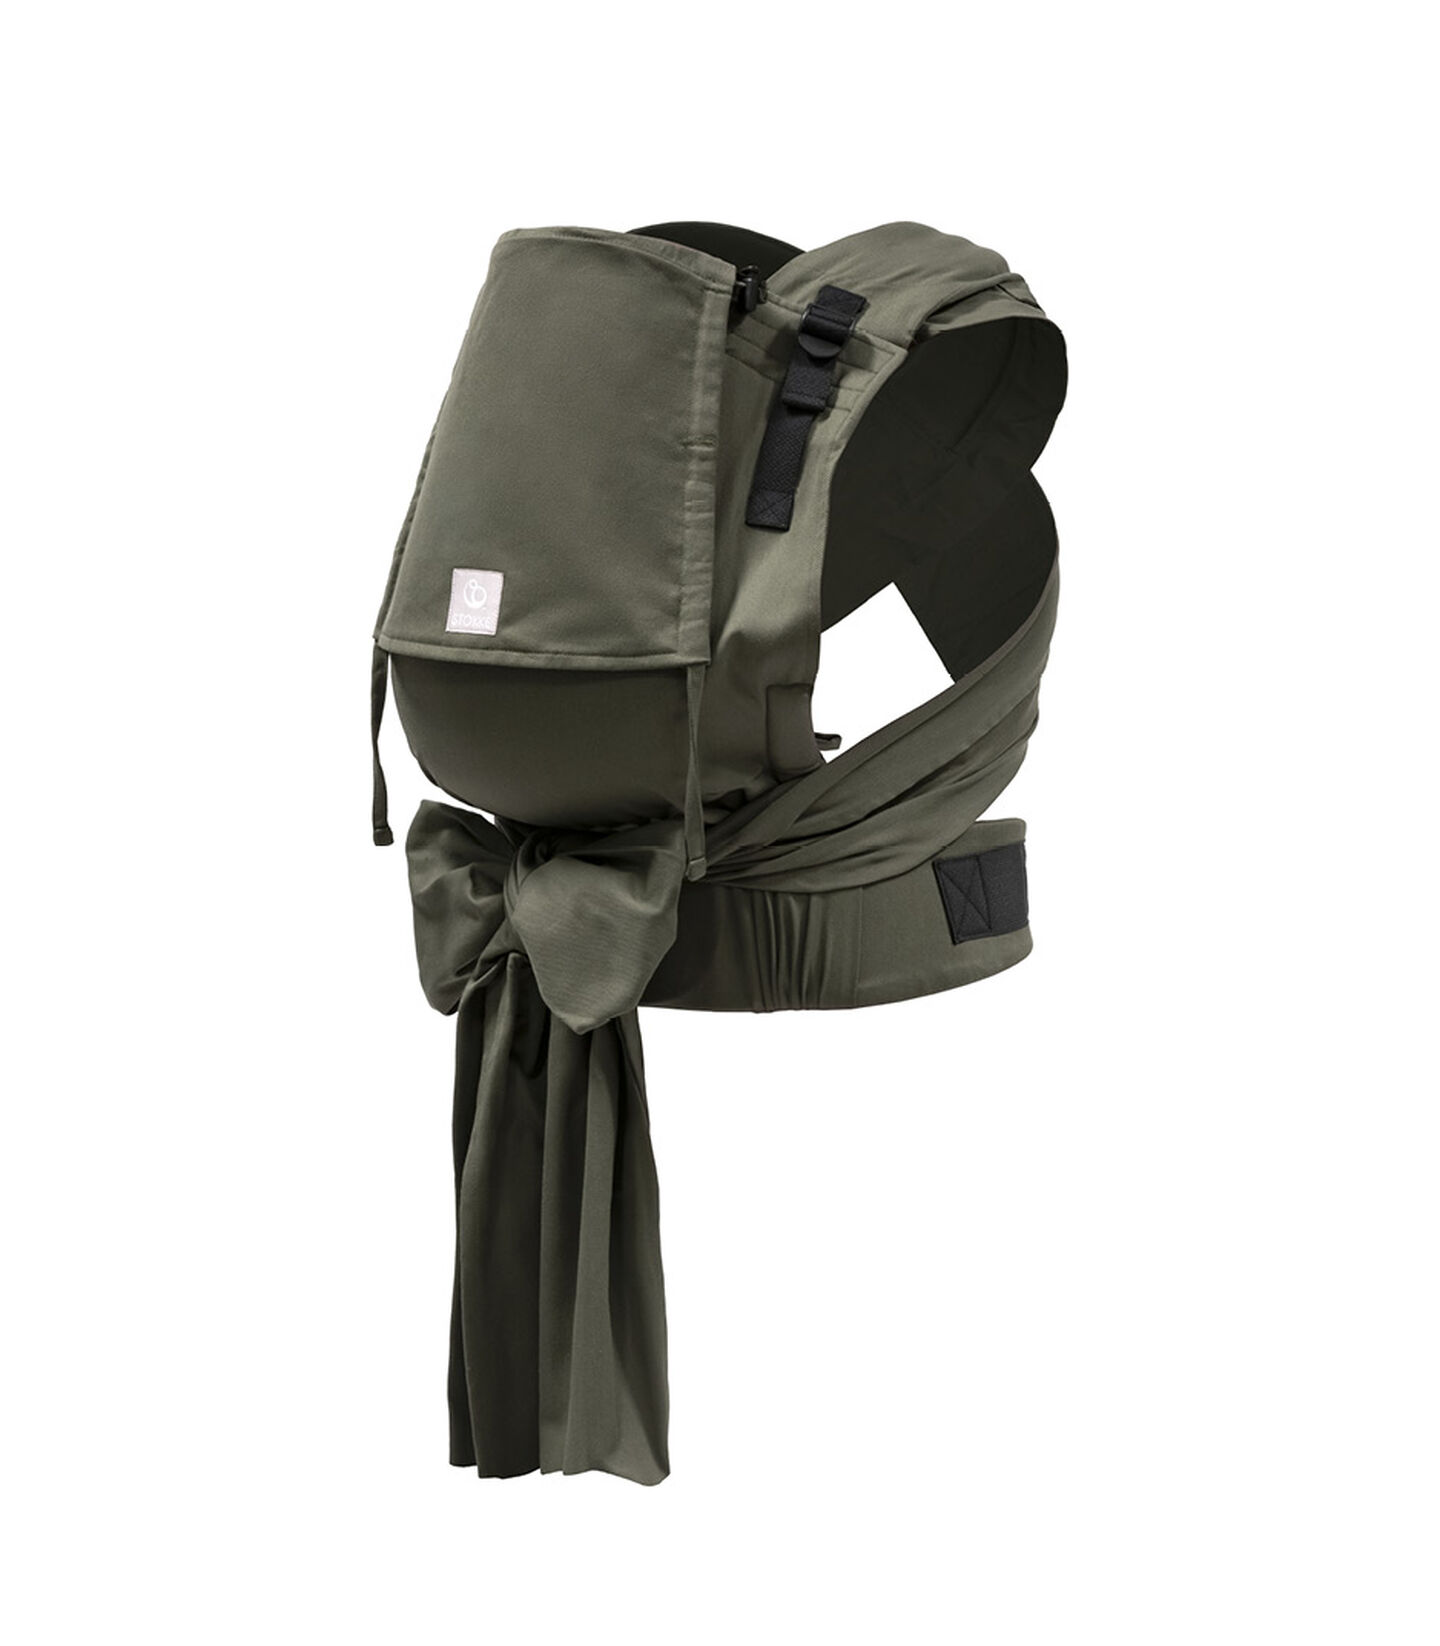 Stokke® Limas™ Babytrage Plus Olive Green, Olive Green, mainview view 1